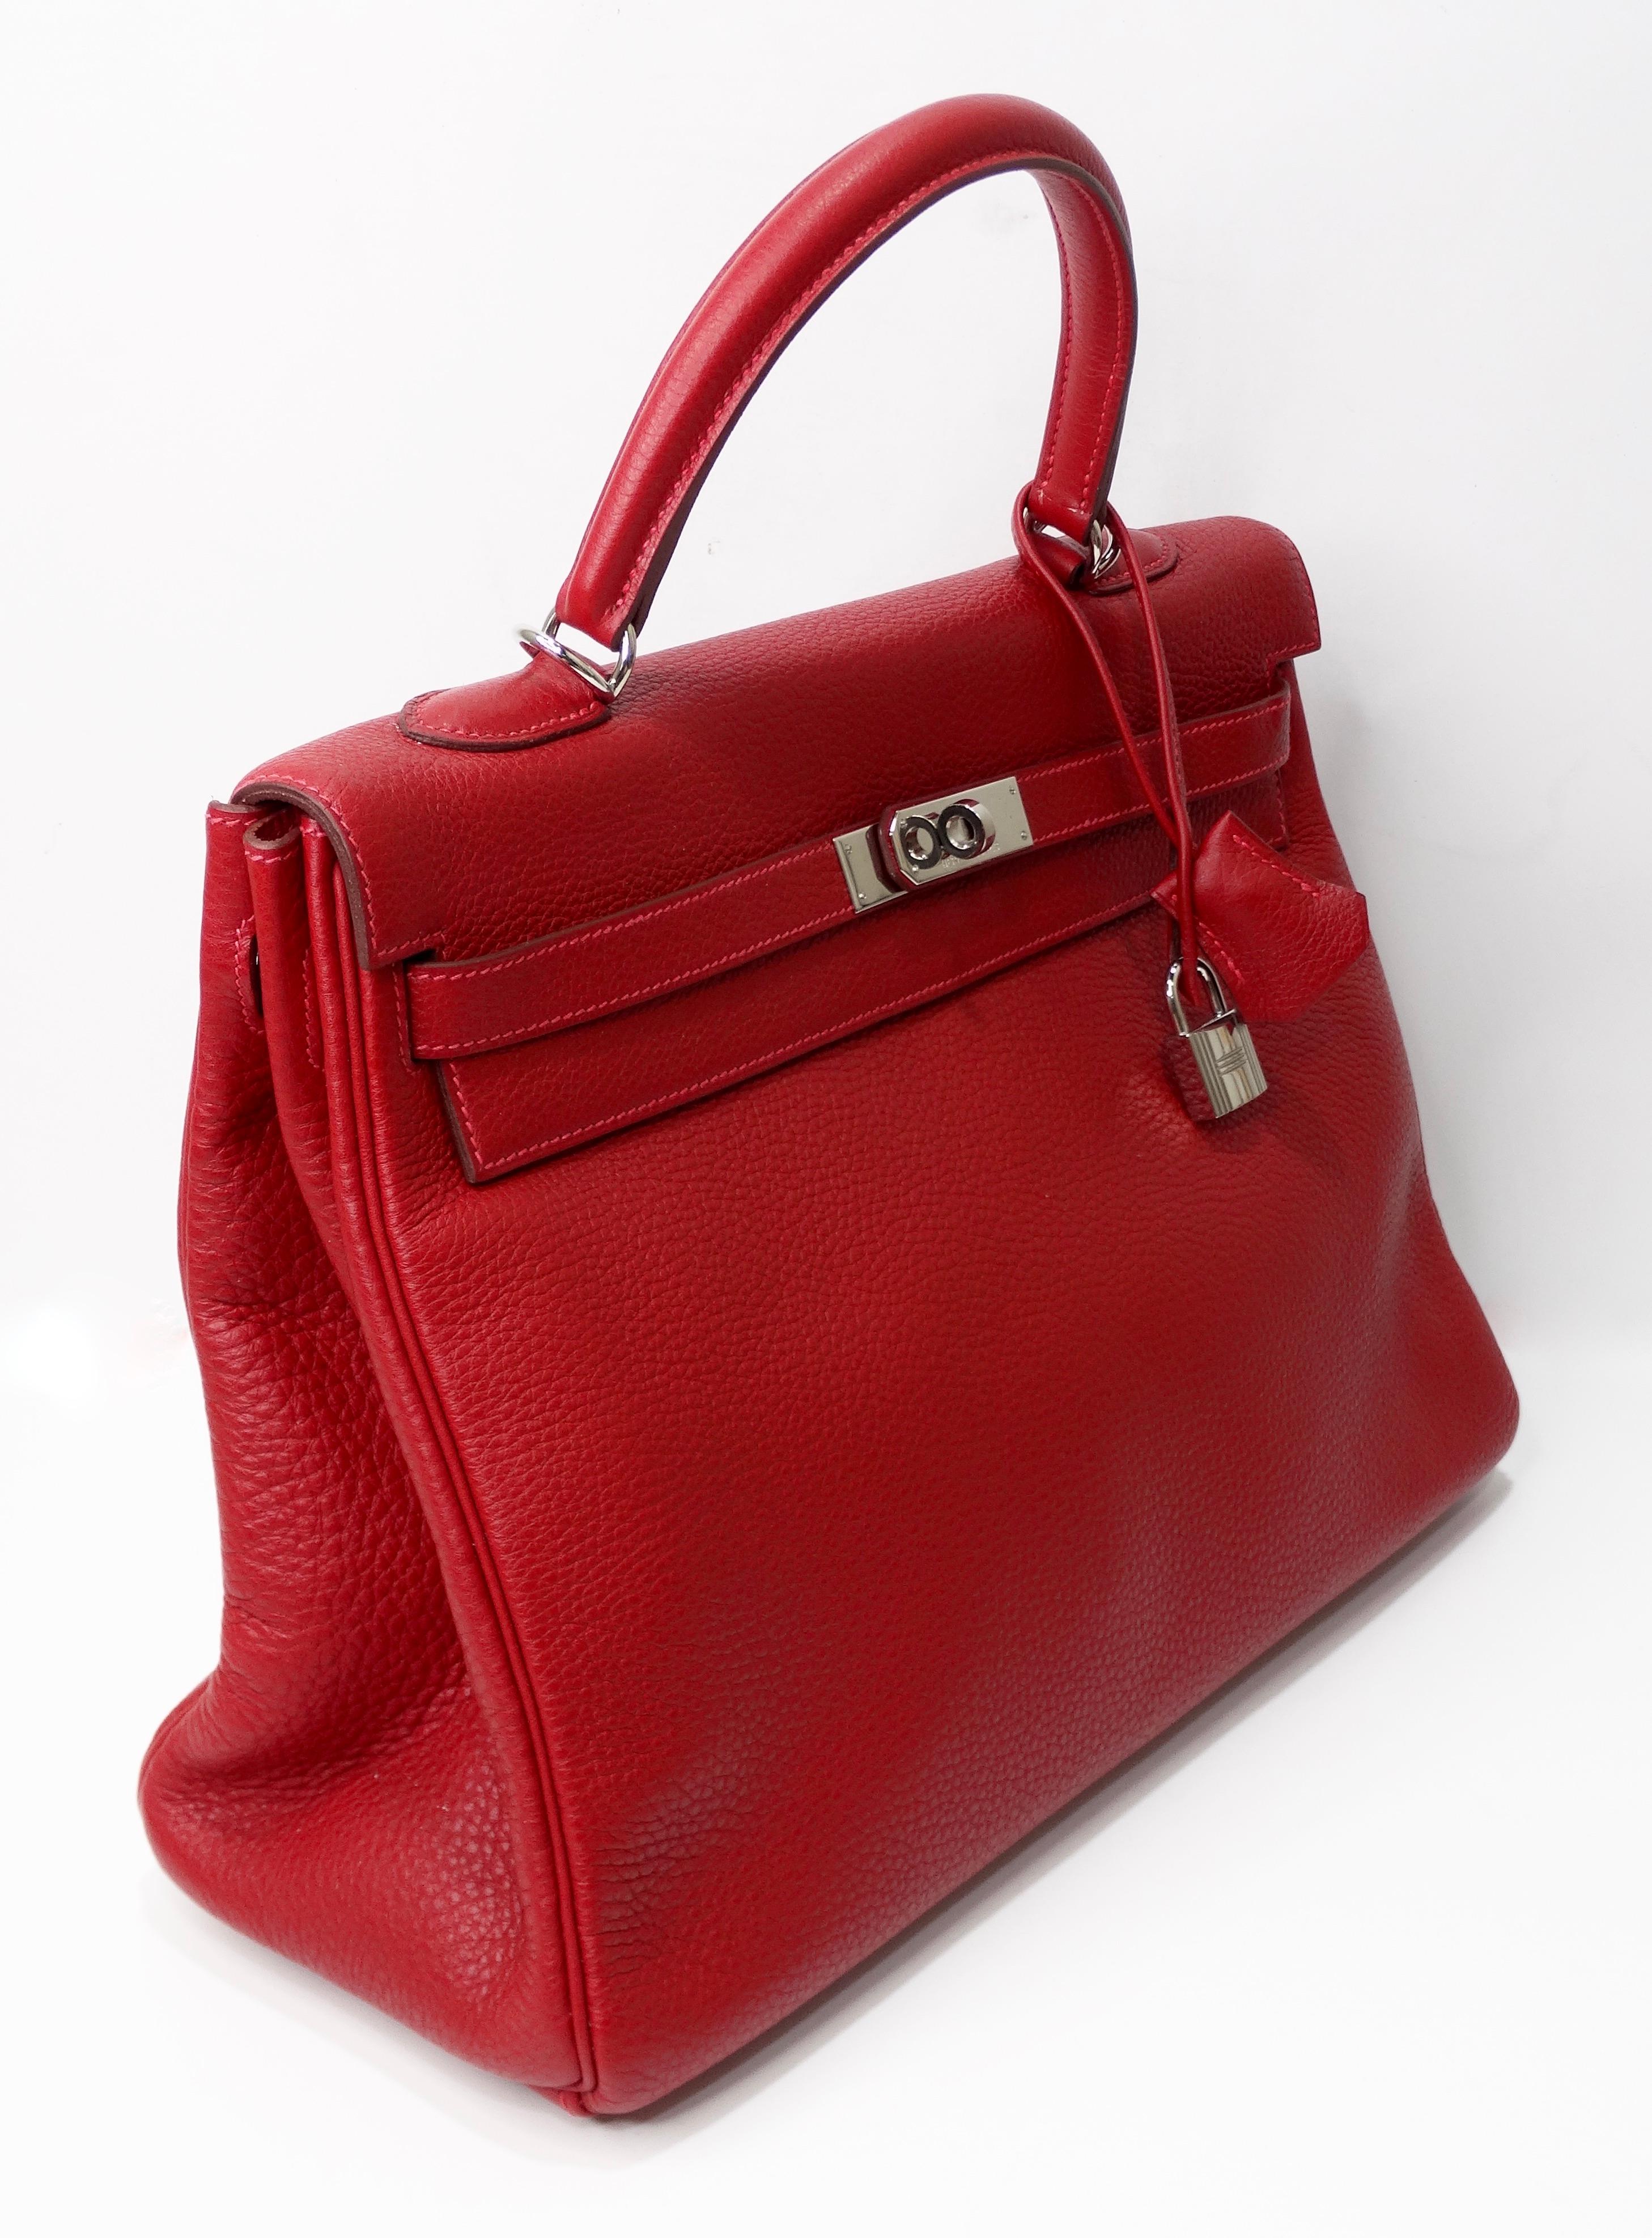 Hello Hermés! Handcrafted by the artisans of Hermes into an iconic 35cm Kelly from 2003. This beautiful Hermes Kelly handbag is crafted from togo leather in the iconic Hermés Rouge with Palladium hardware. Features pink stitching, single rolled top